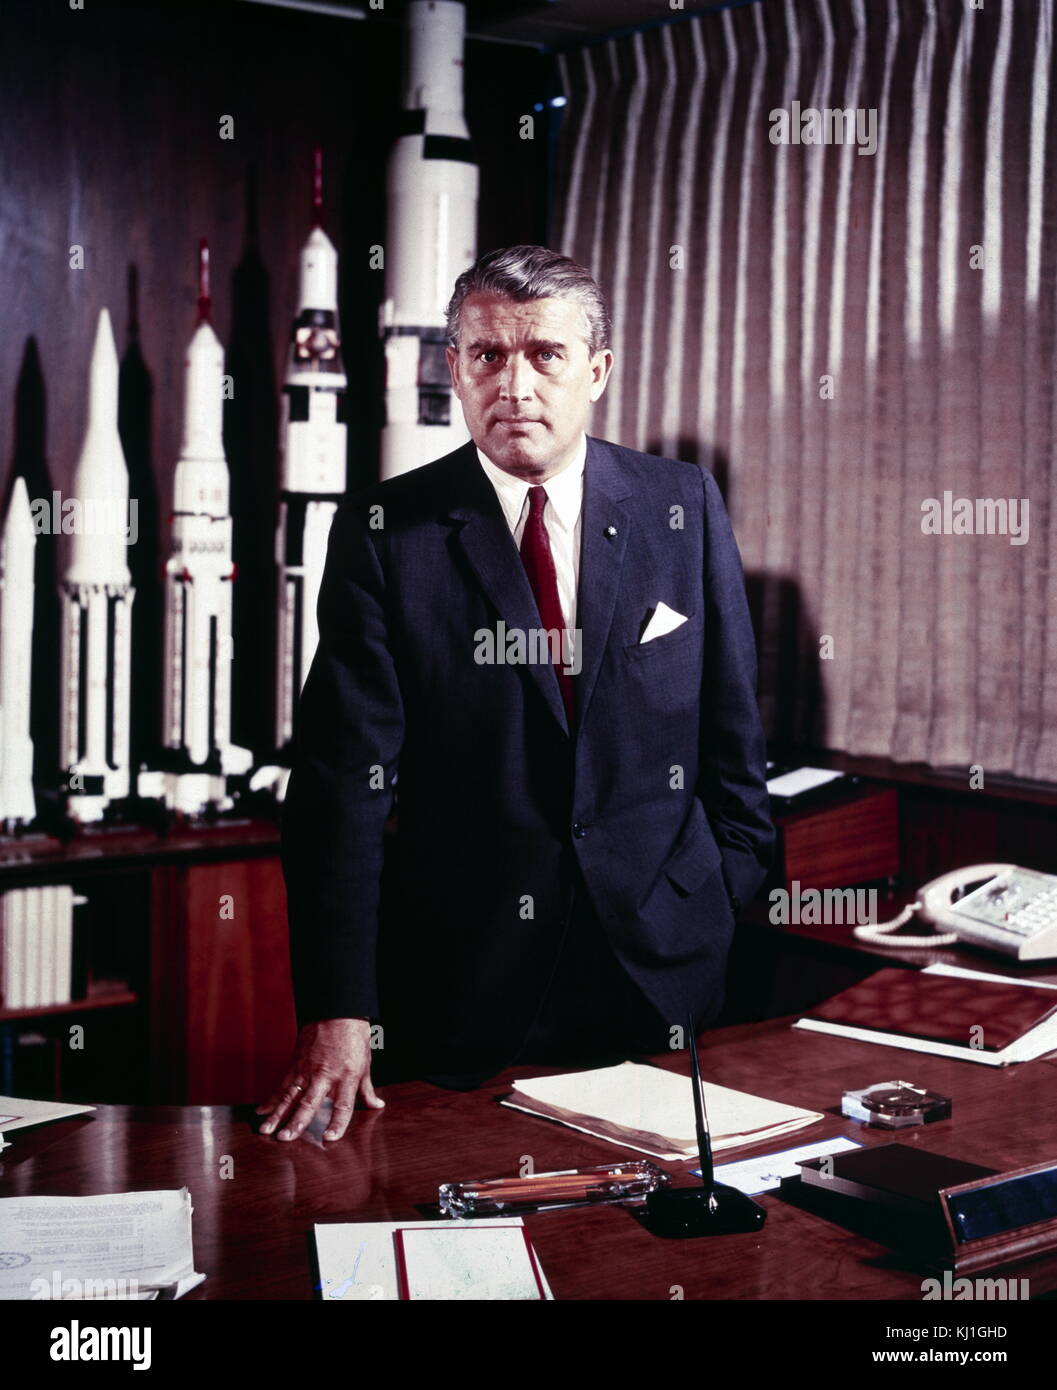 Wernher Magnus Maximilian Freiherr von Braun (March 23, 1912 – June 16, 1977) was a German, later American, aerospace engineer and space architect credited with inventing the V-2 rocket for Nazi Germany and the Saturn V for the United States. He was one of the leading figures in the development of rocket technology in Nazi Germany, where he was a member of the Nazi Party and the SS. Stock Photo